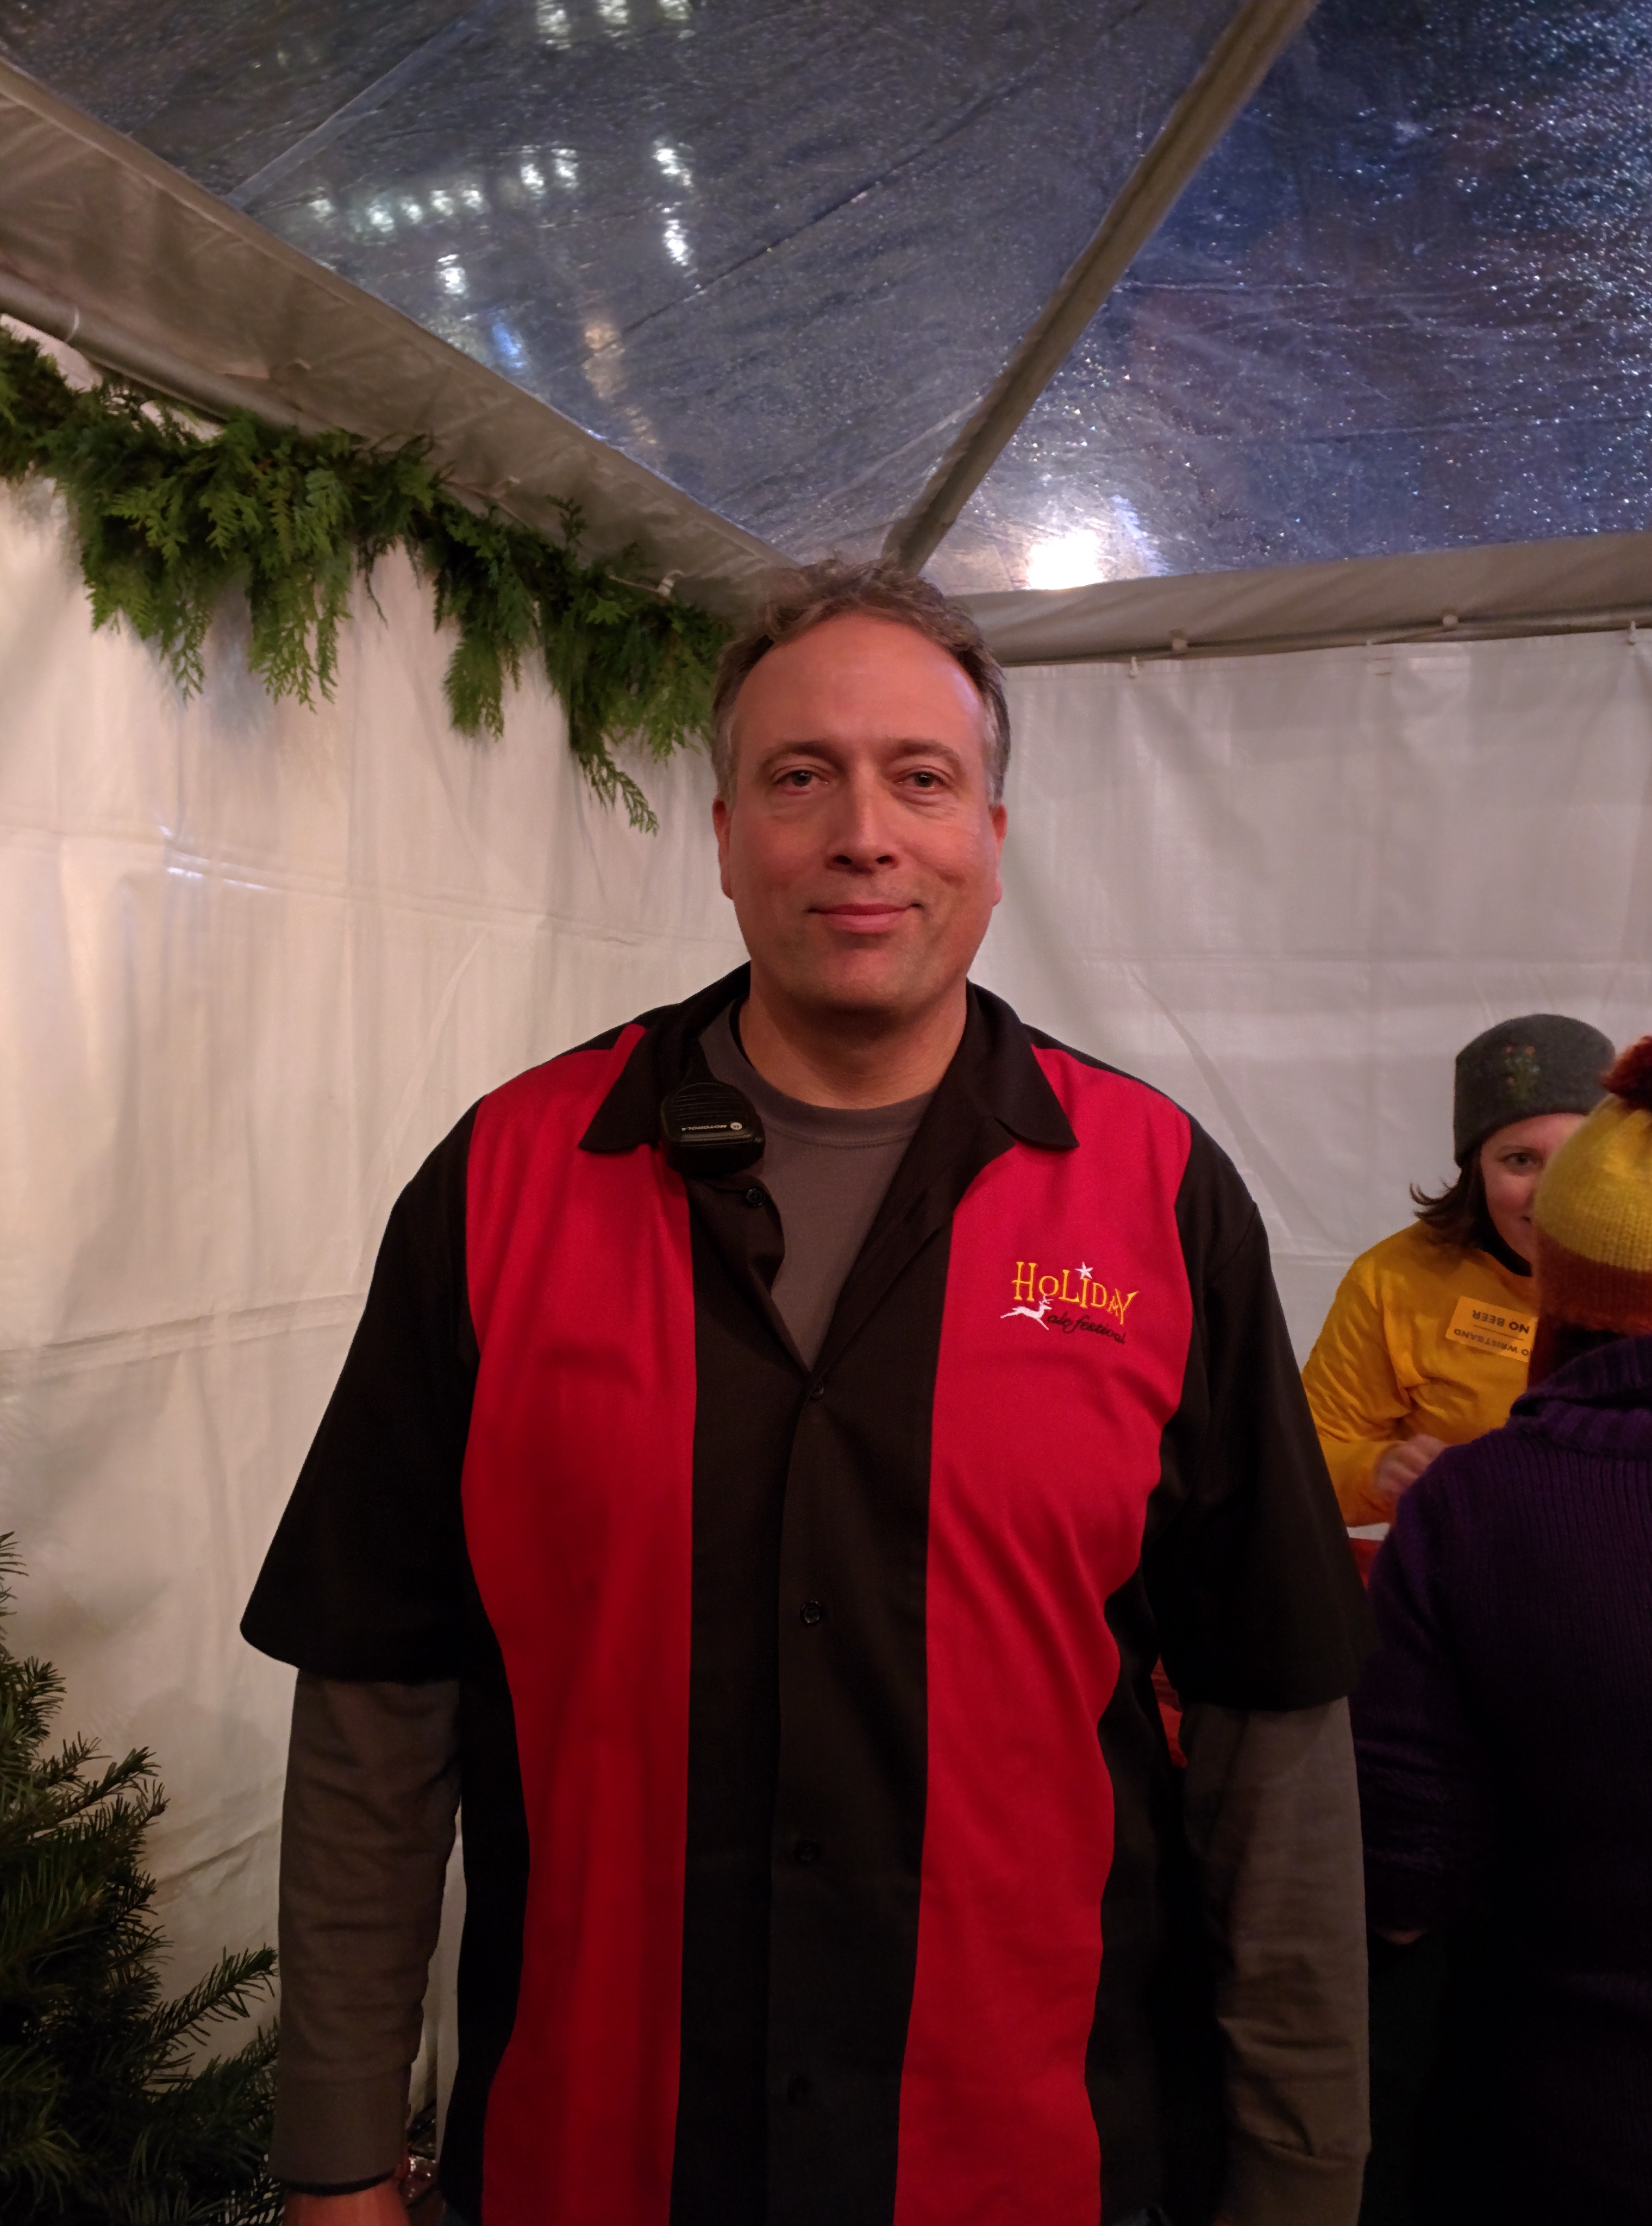 Preston Weesner bravely holding court at the 2015 Holiday Ale Festival.